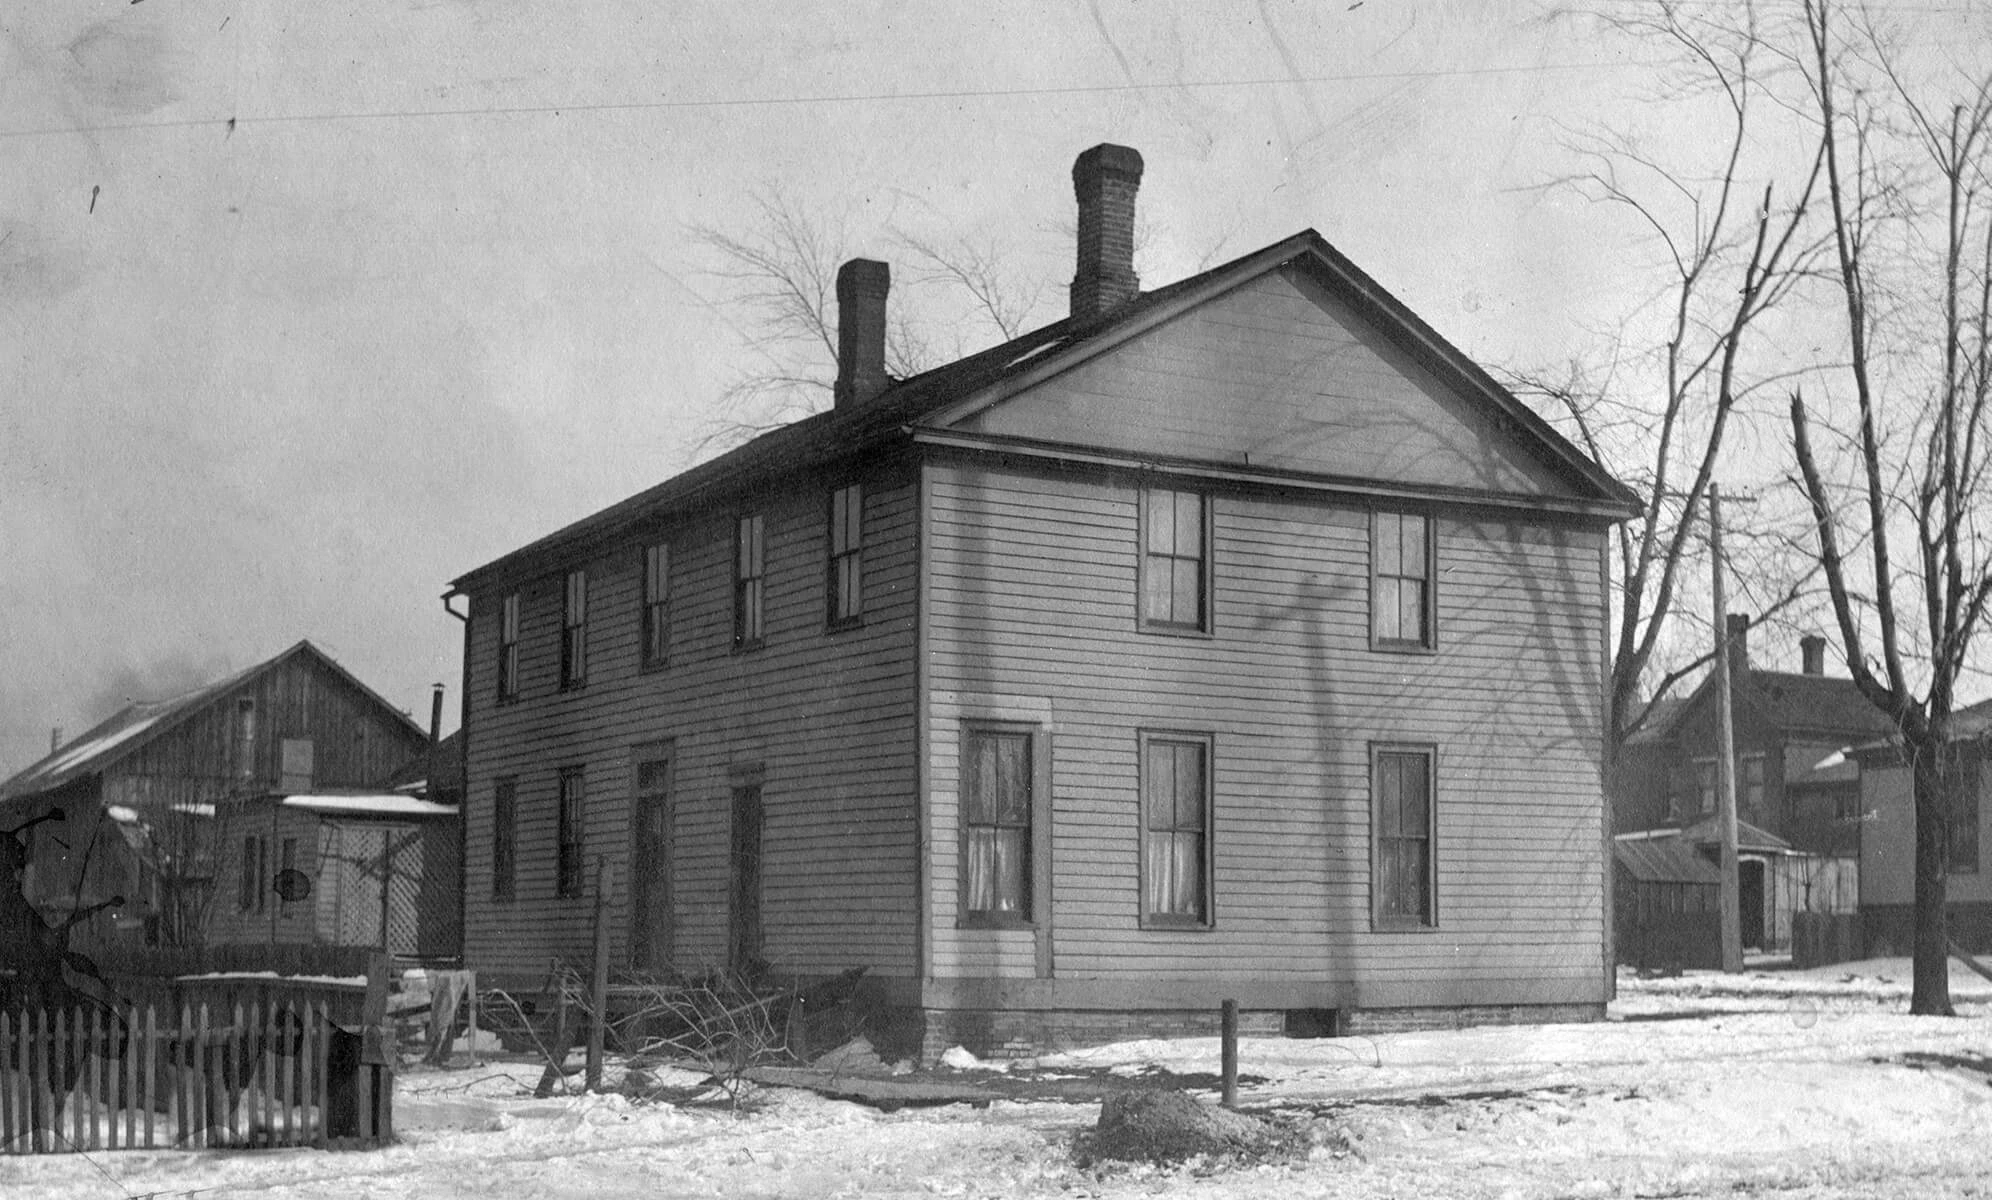 A two story wooden building with many windows and two chimneys coming out the top.